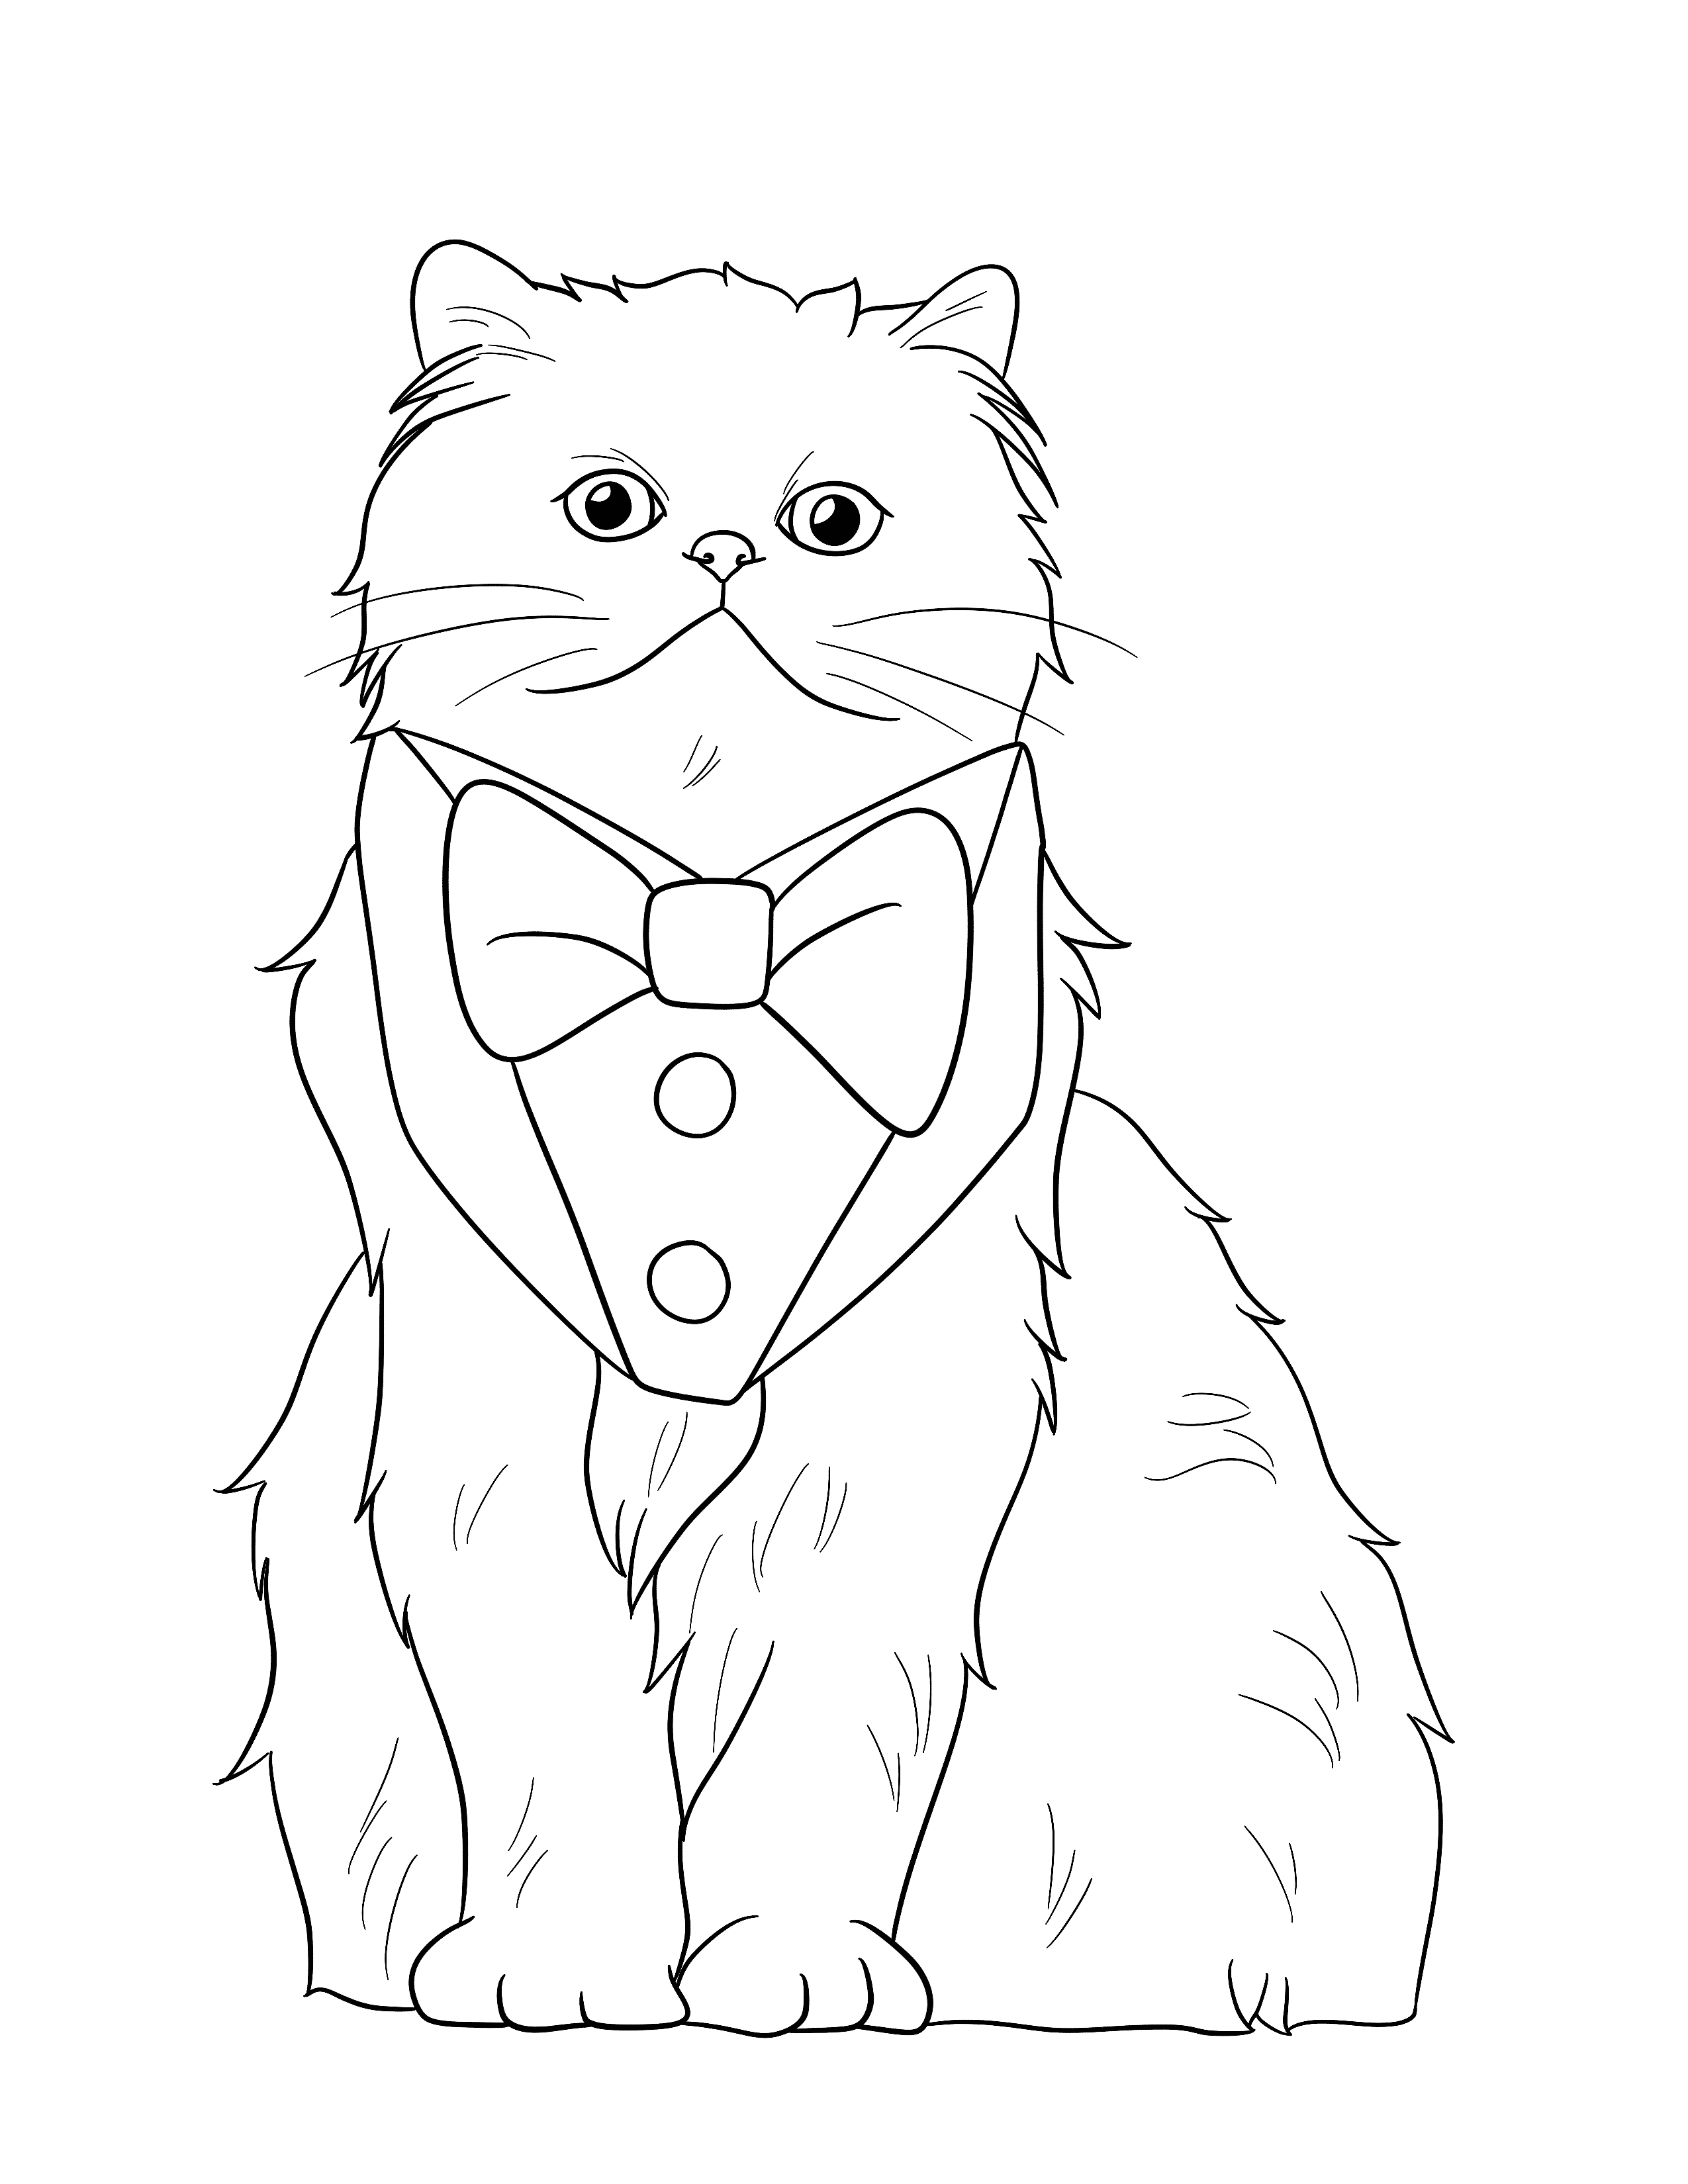 Pet colouring page